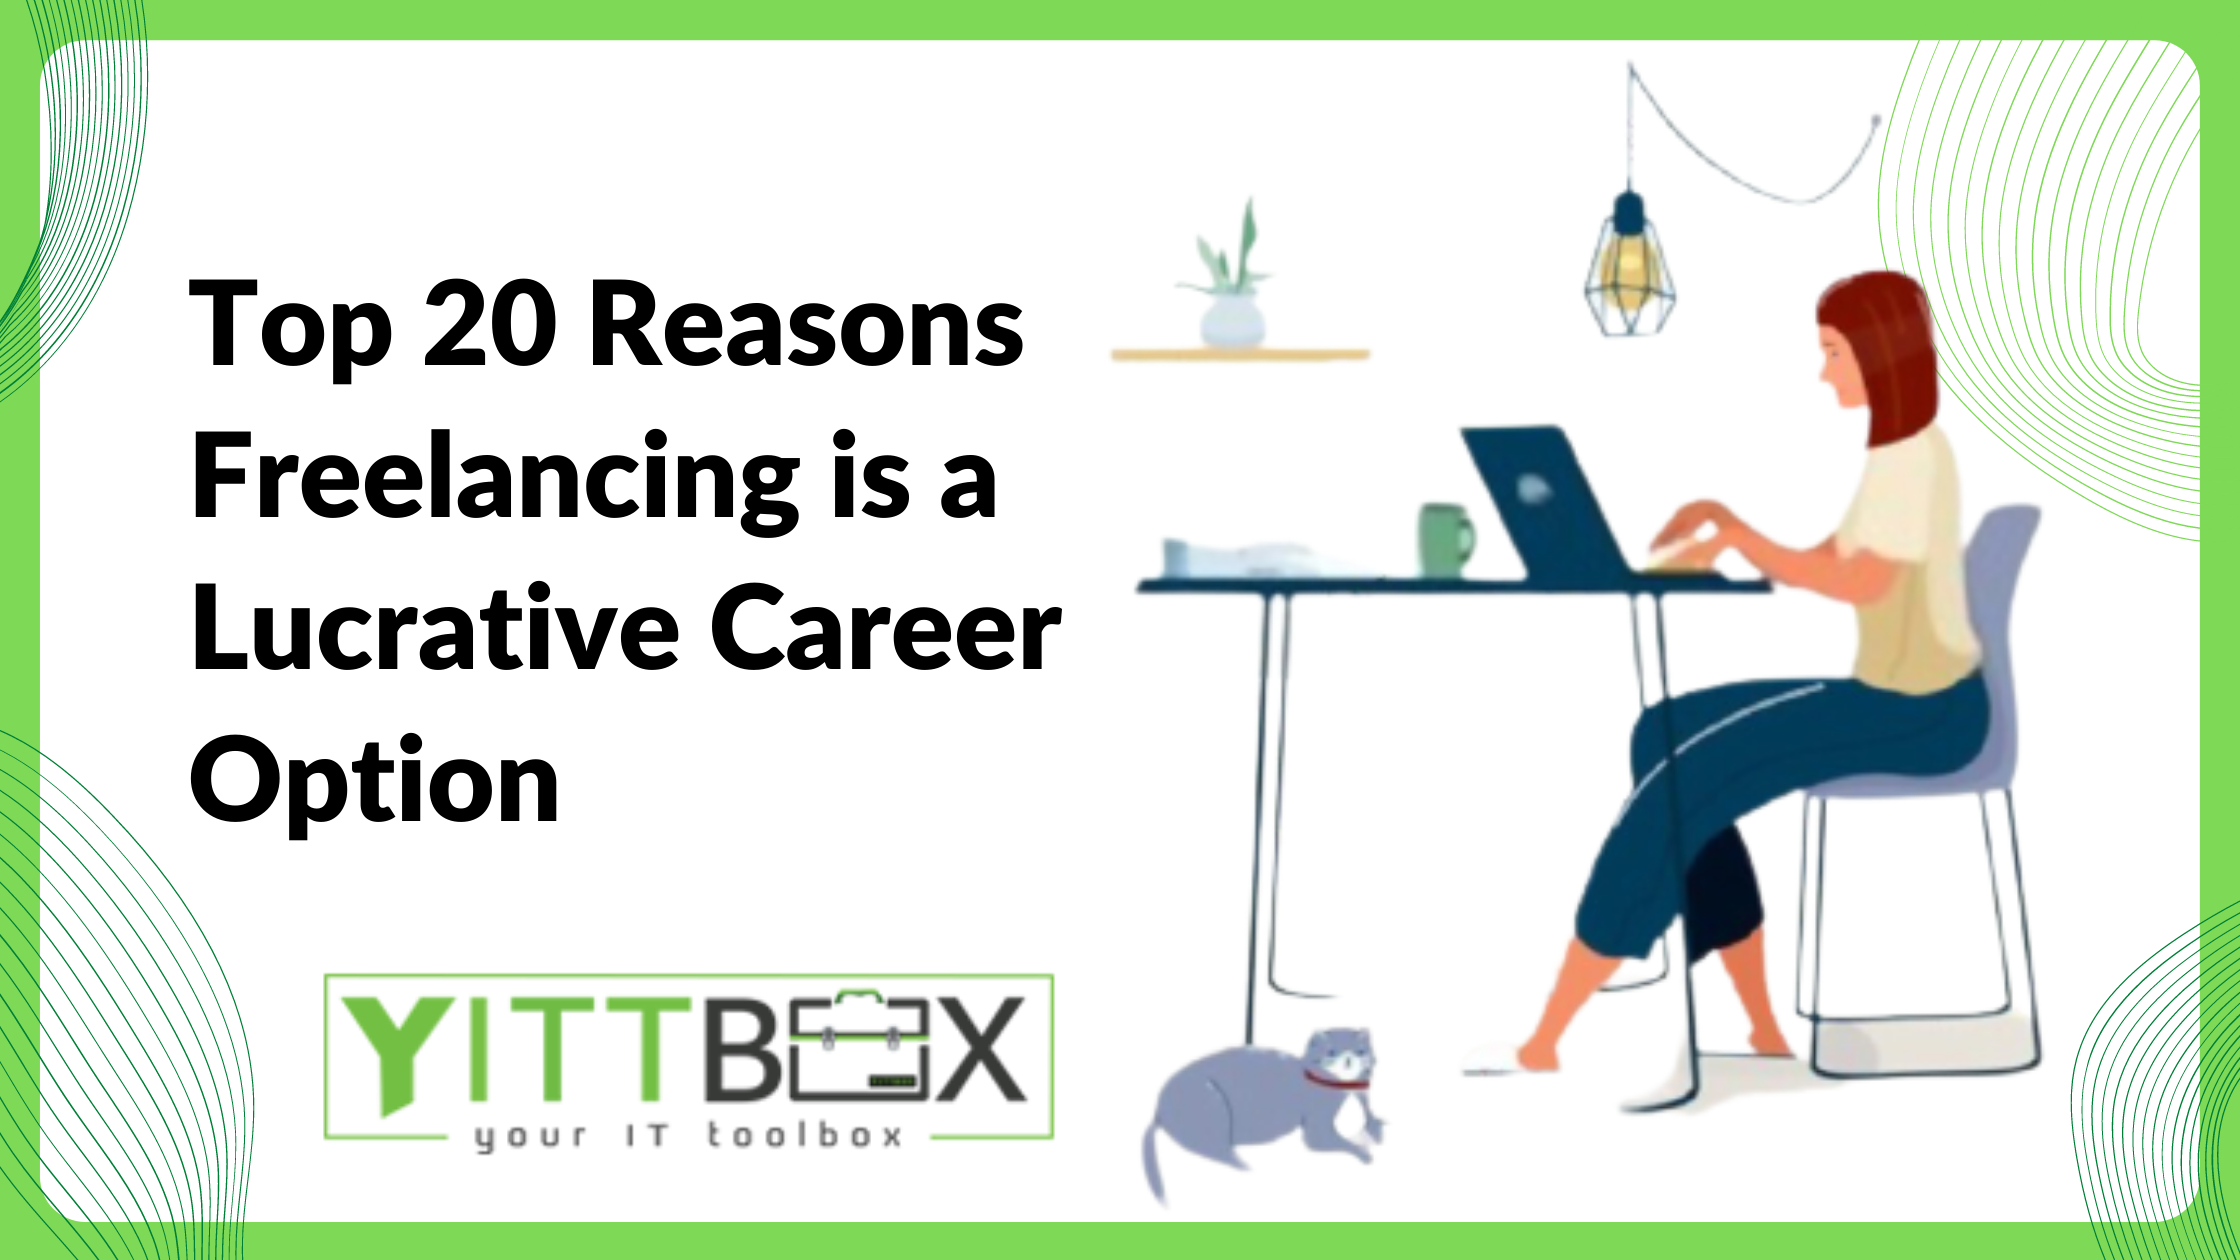 Top 20 Reasons Freelancing is a Lucrative Career Option